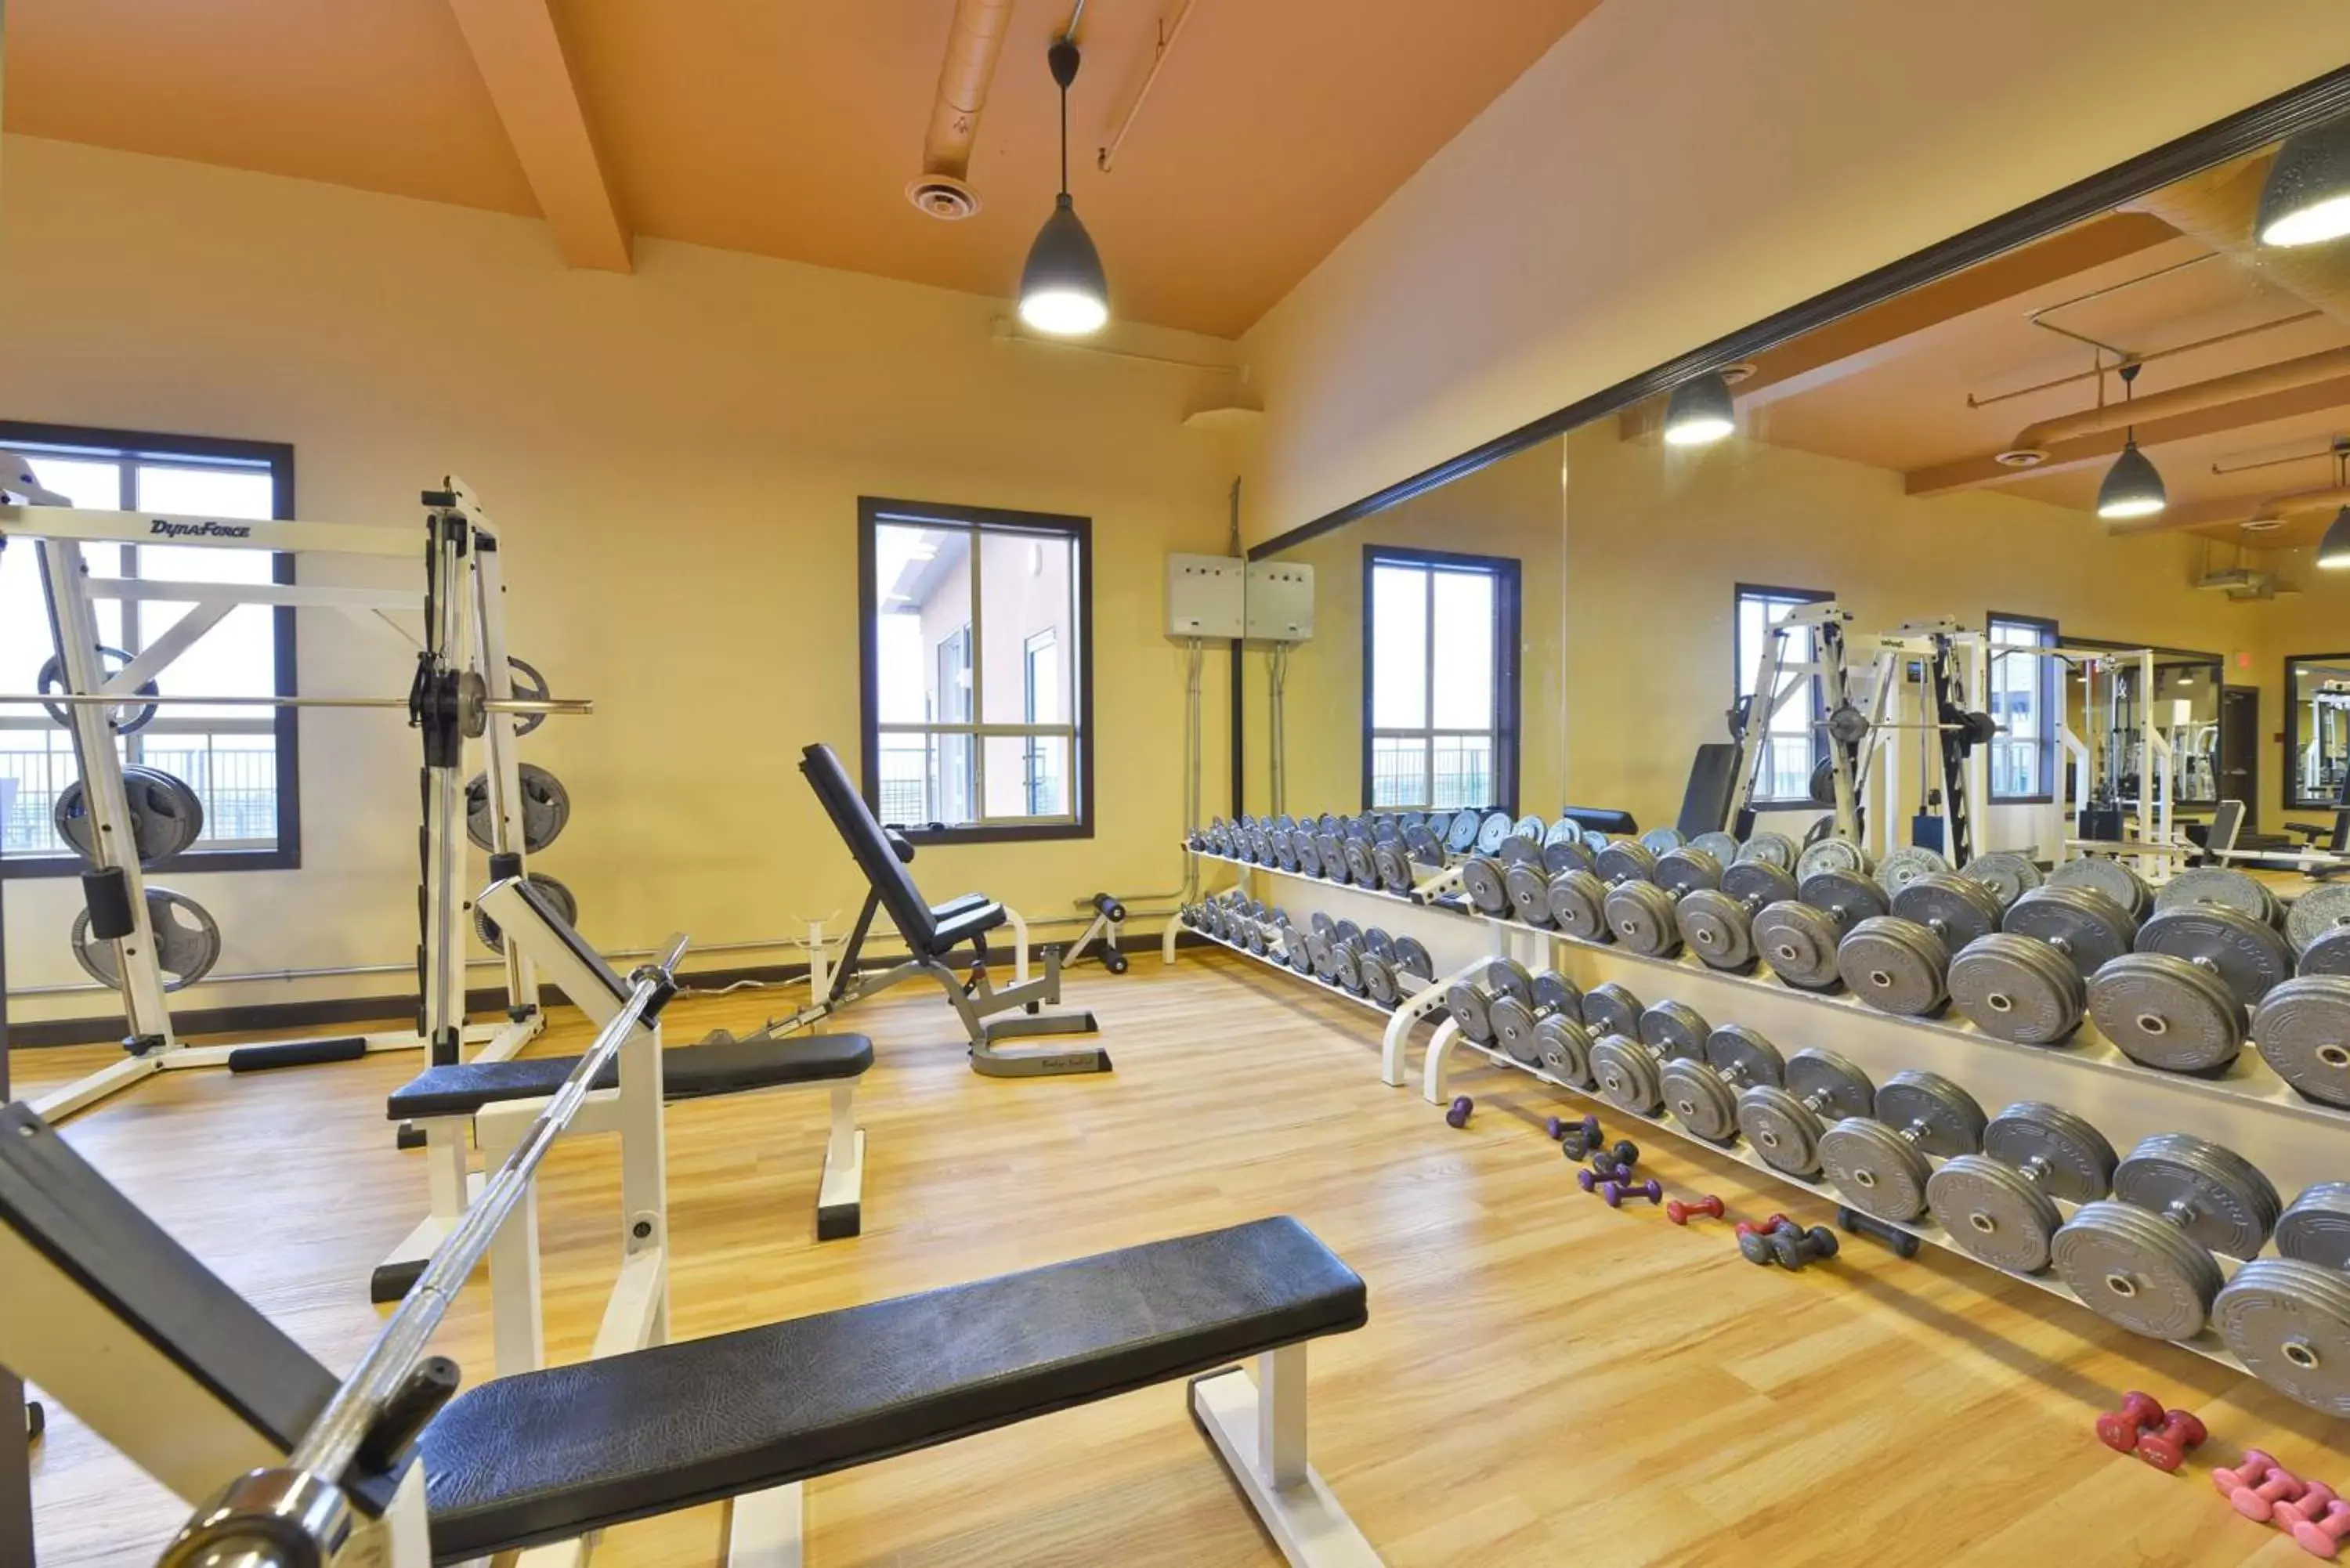 Fitness centre/facilities, Fitness Center/Facilities in Prestige Harbourfront Resort, WorldHotels Luxury